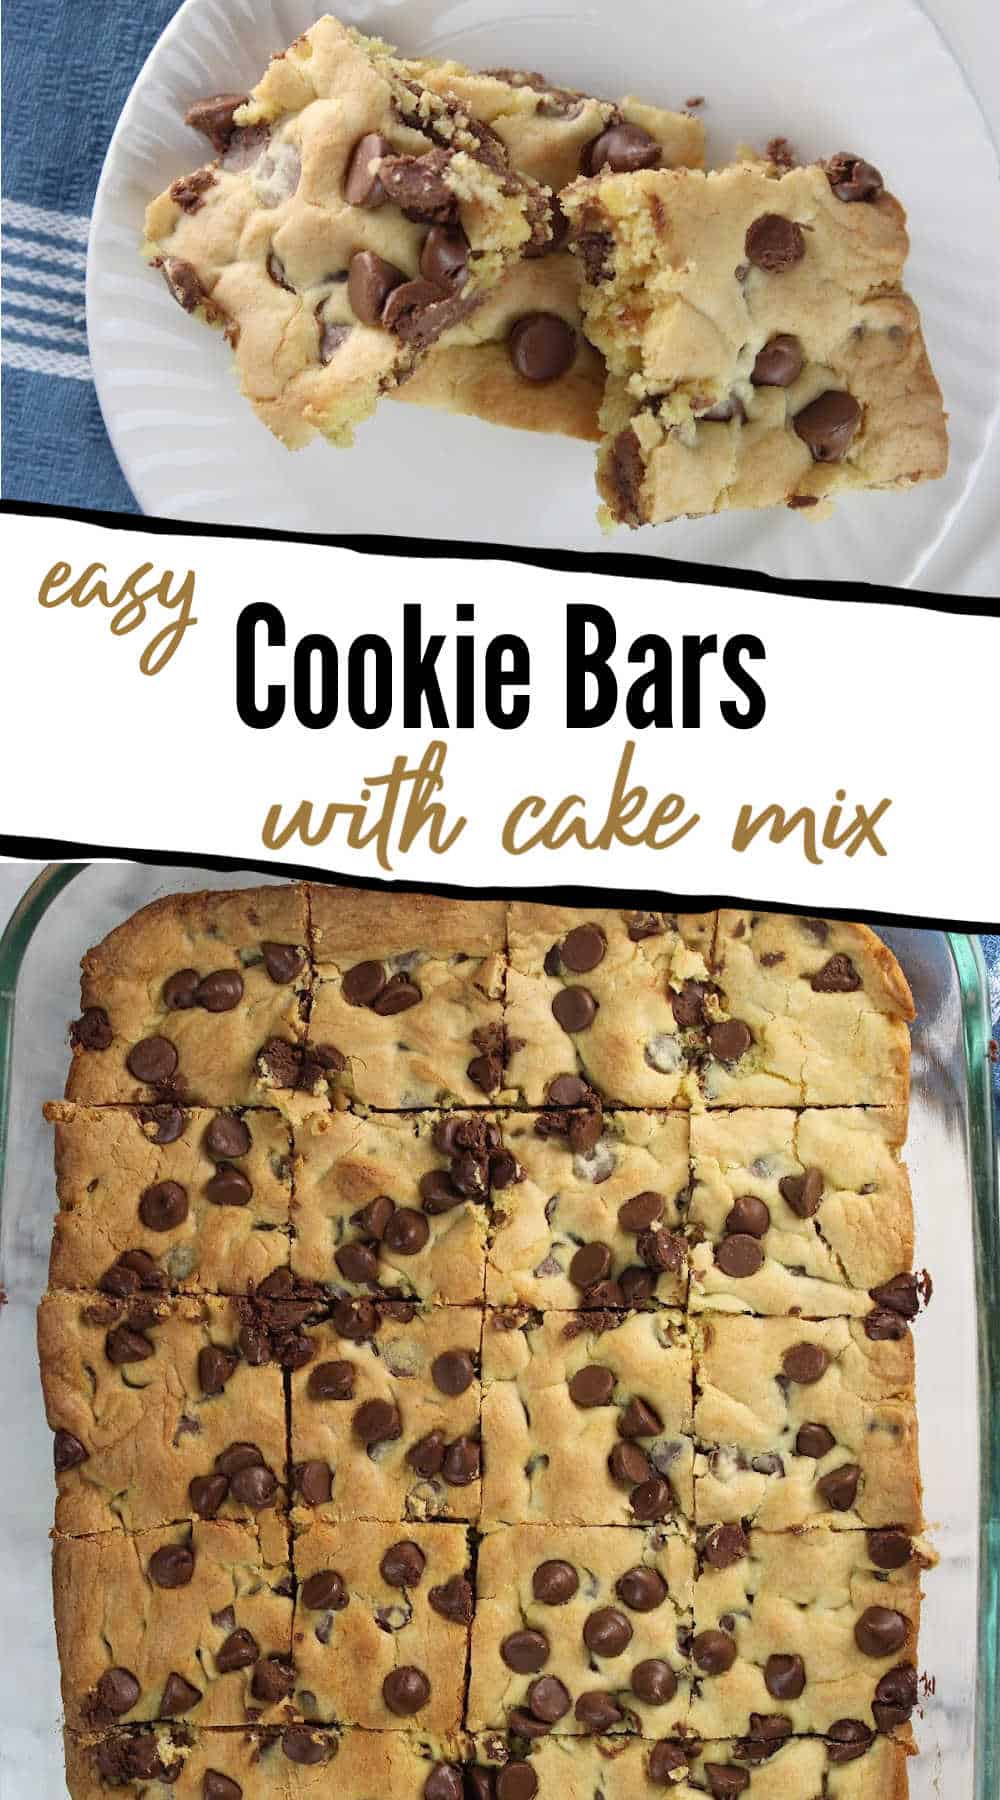 cookie bars on a plate with cut cookie bars in a pan below.